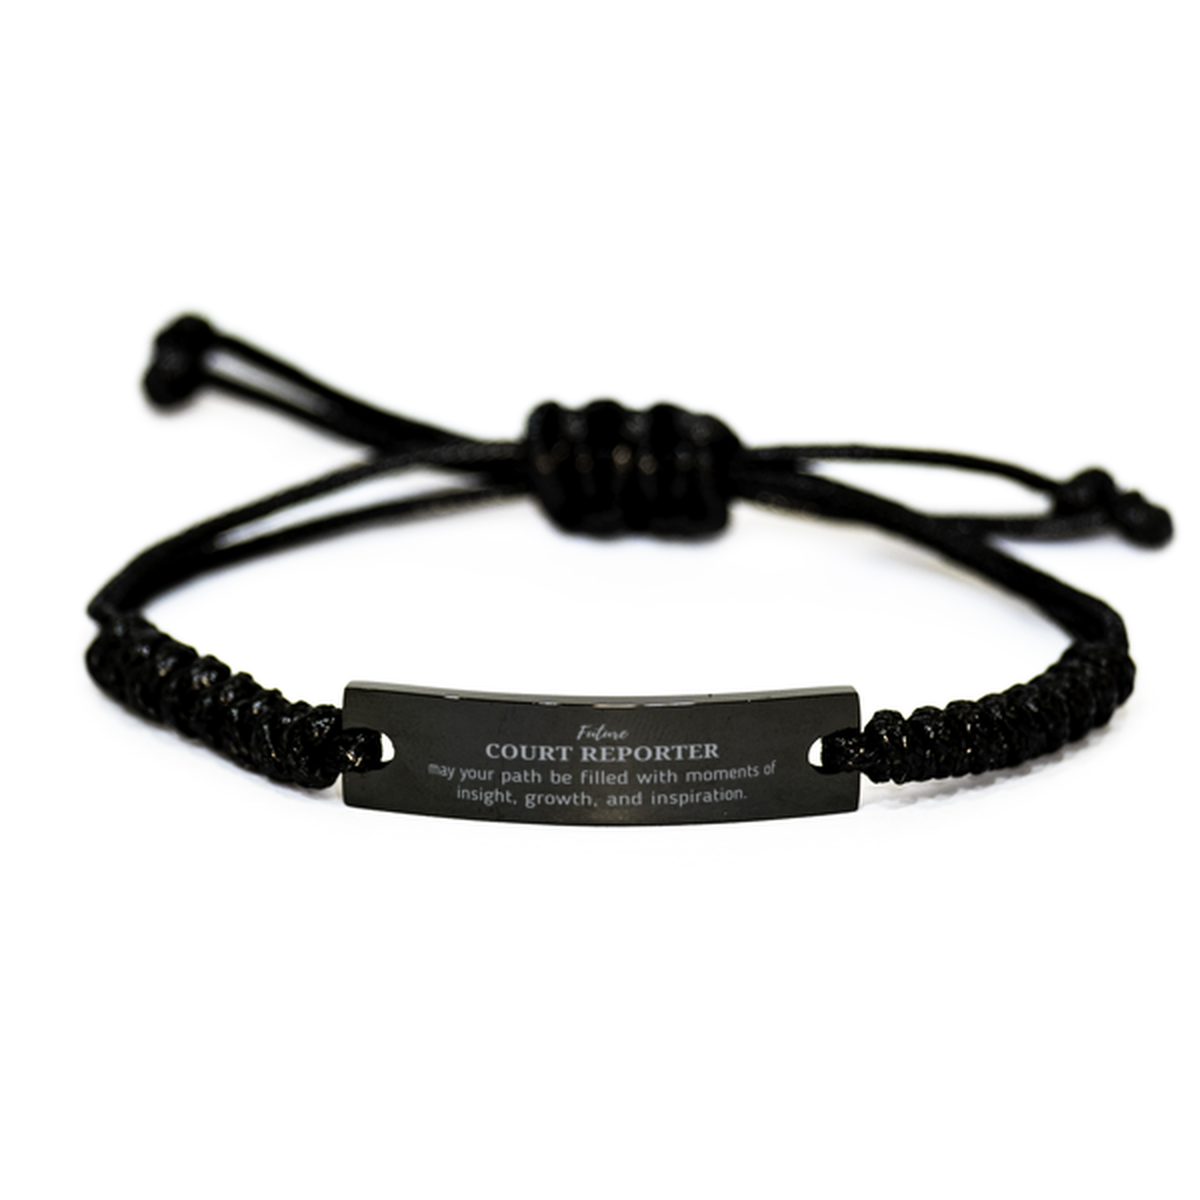 Future Court Reporter Gifts, May your path be filled with moments of insight, Graduation Gifts for New Court Reporter, Christmas Unique Black Rope Bracelet For Men, Women, Friends